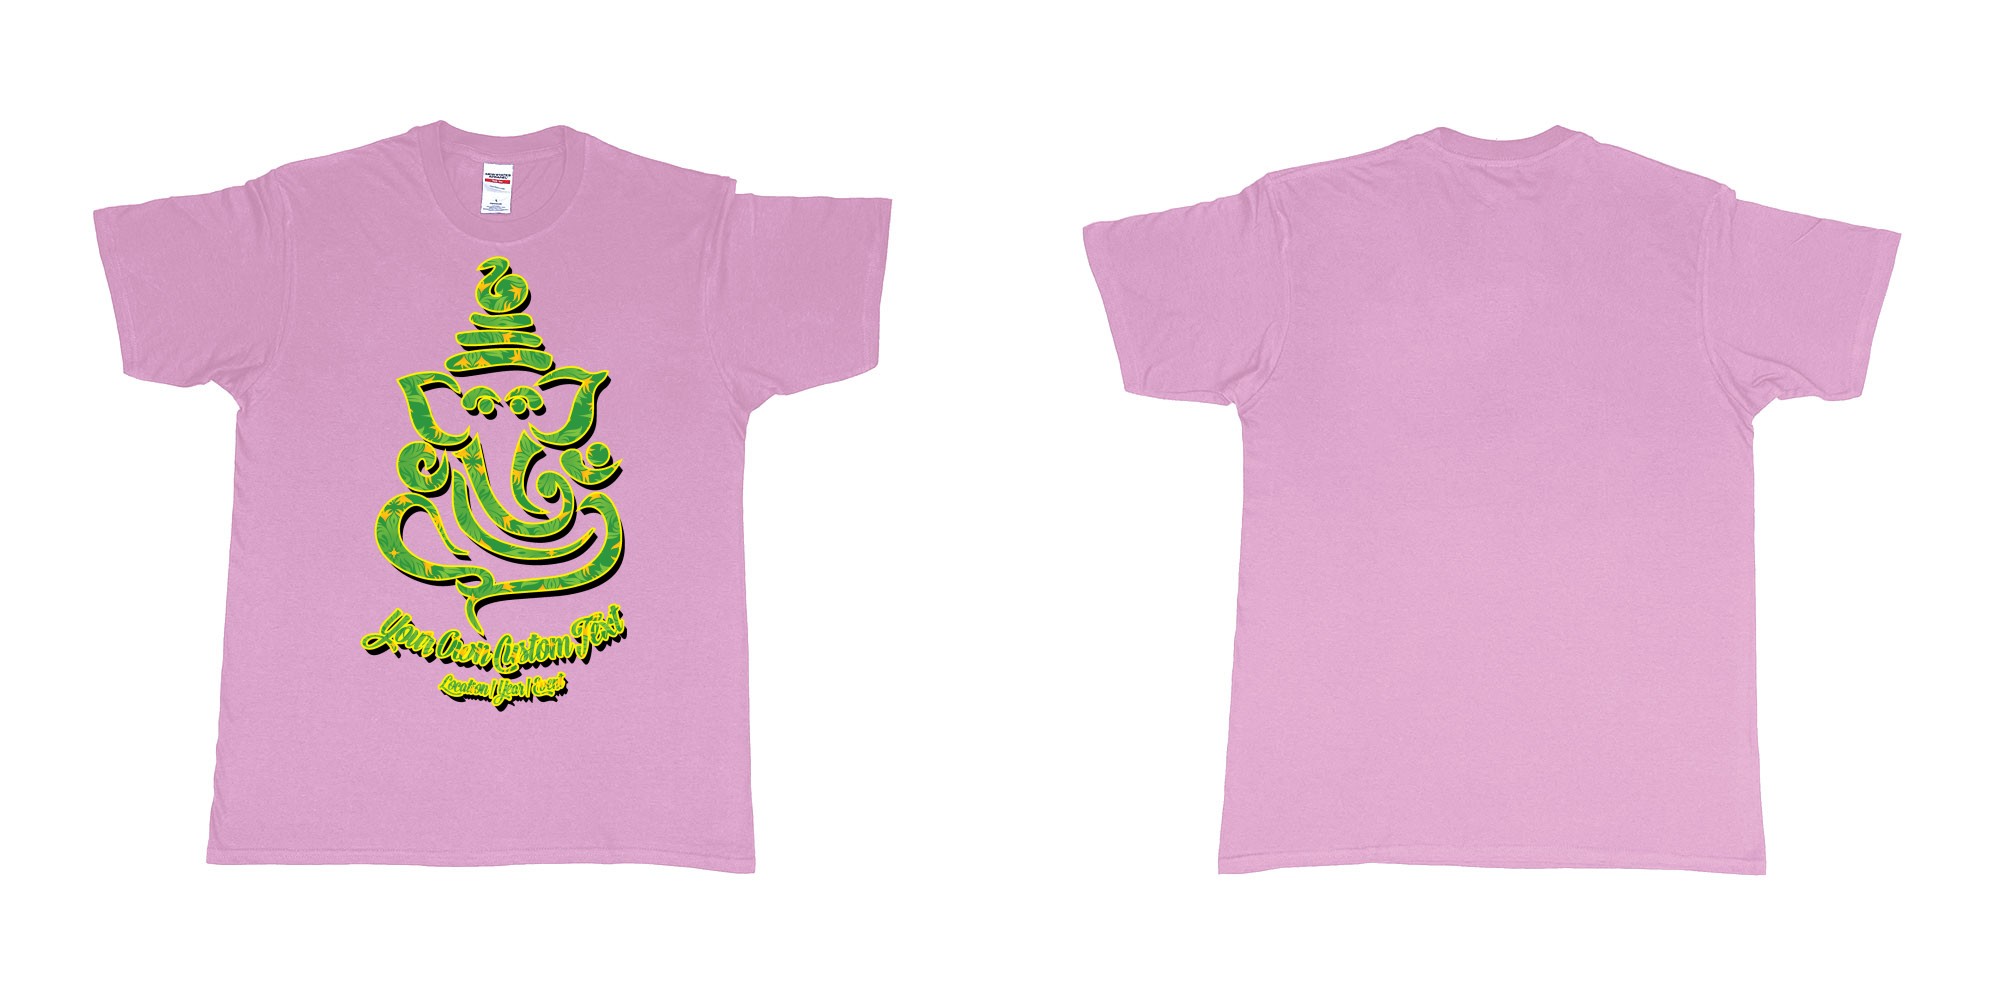 Custom tshirt design ganesh soft jungle yoga customize own design in fabric color light-pink choice your own text made in Bali by The Pirate Way